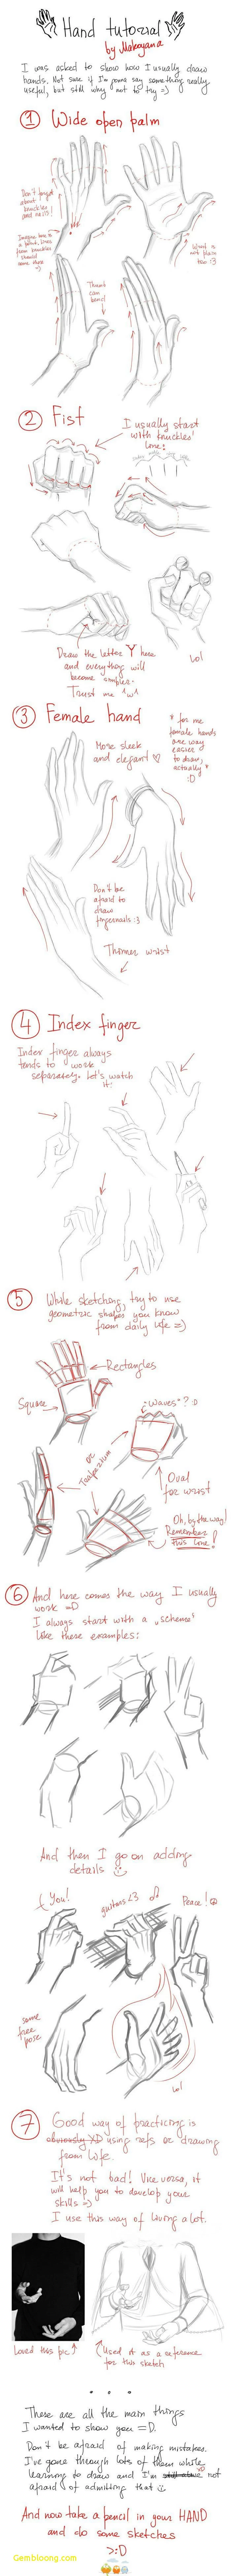 how to draw a hand, step by step, diy tutorials, easy drawings step by step, different shapes